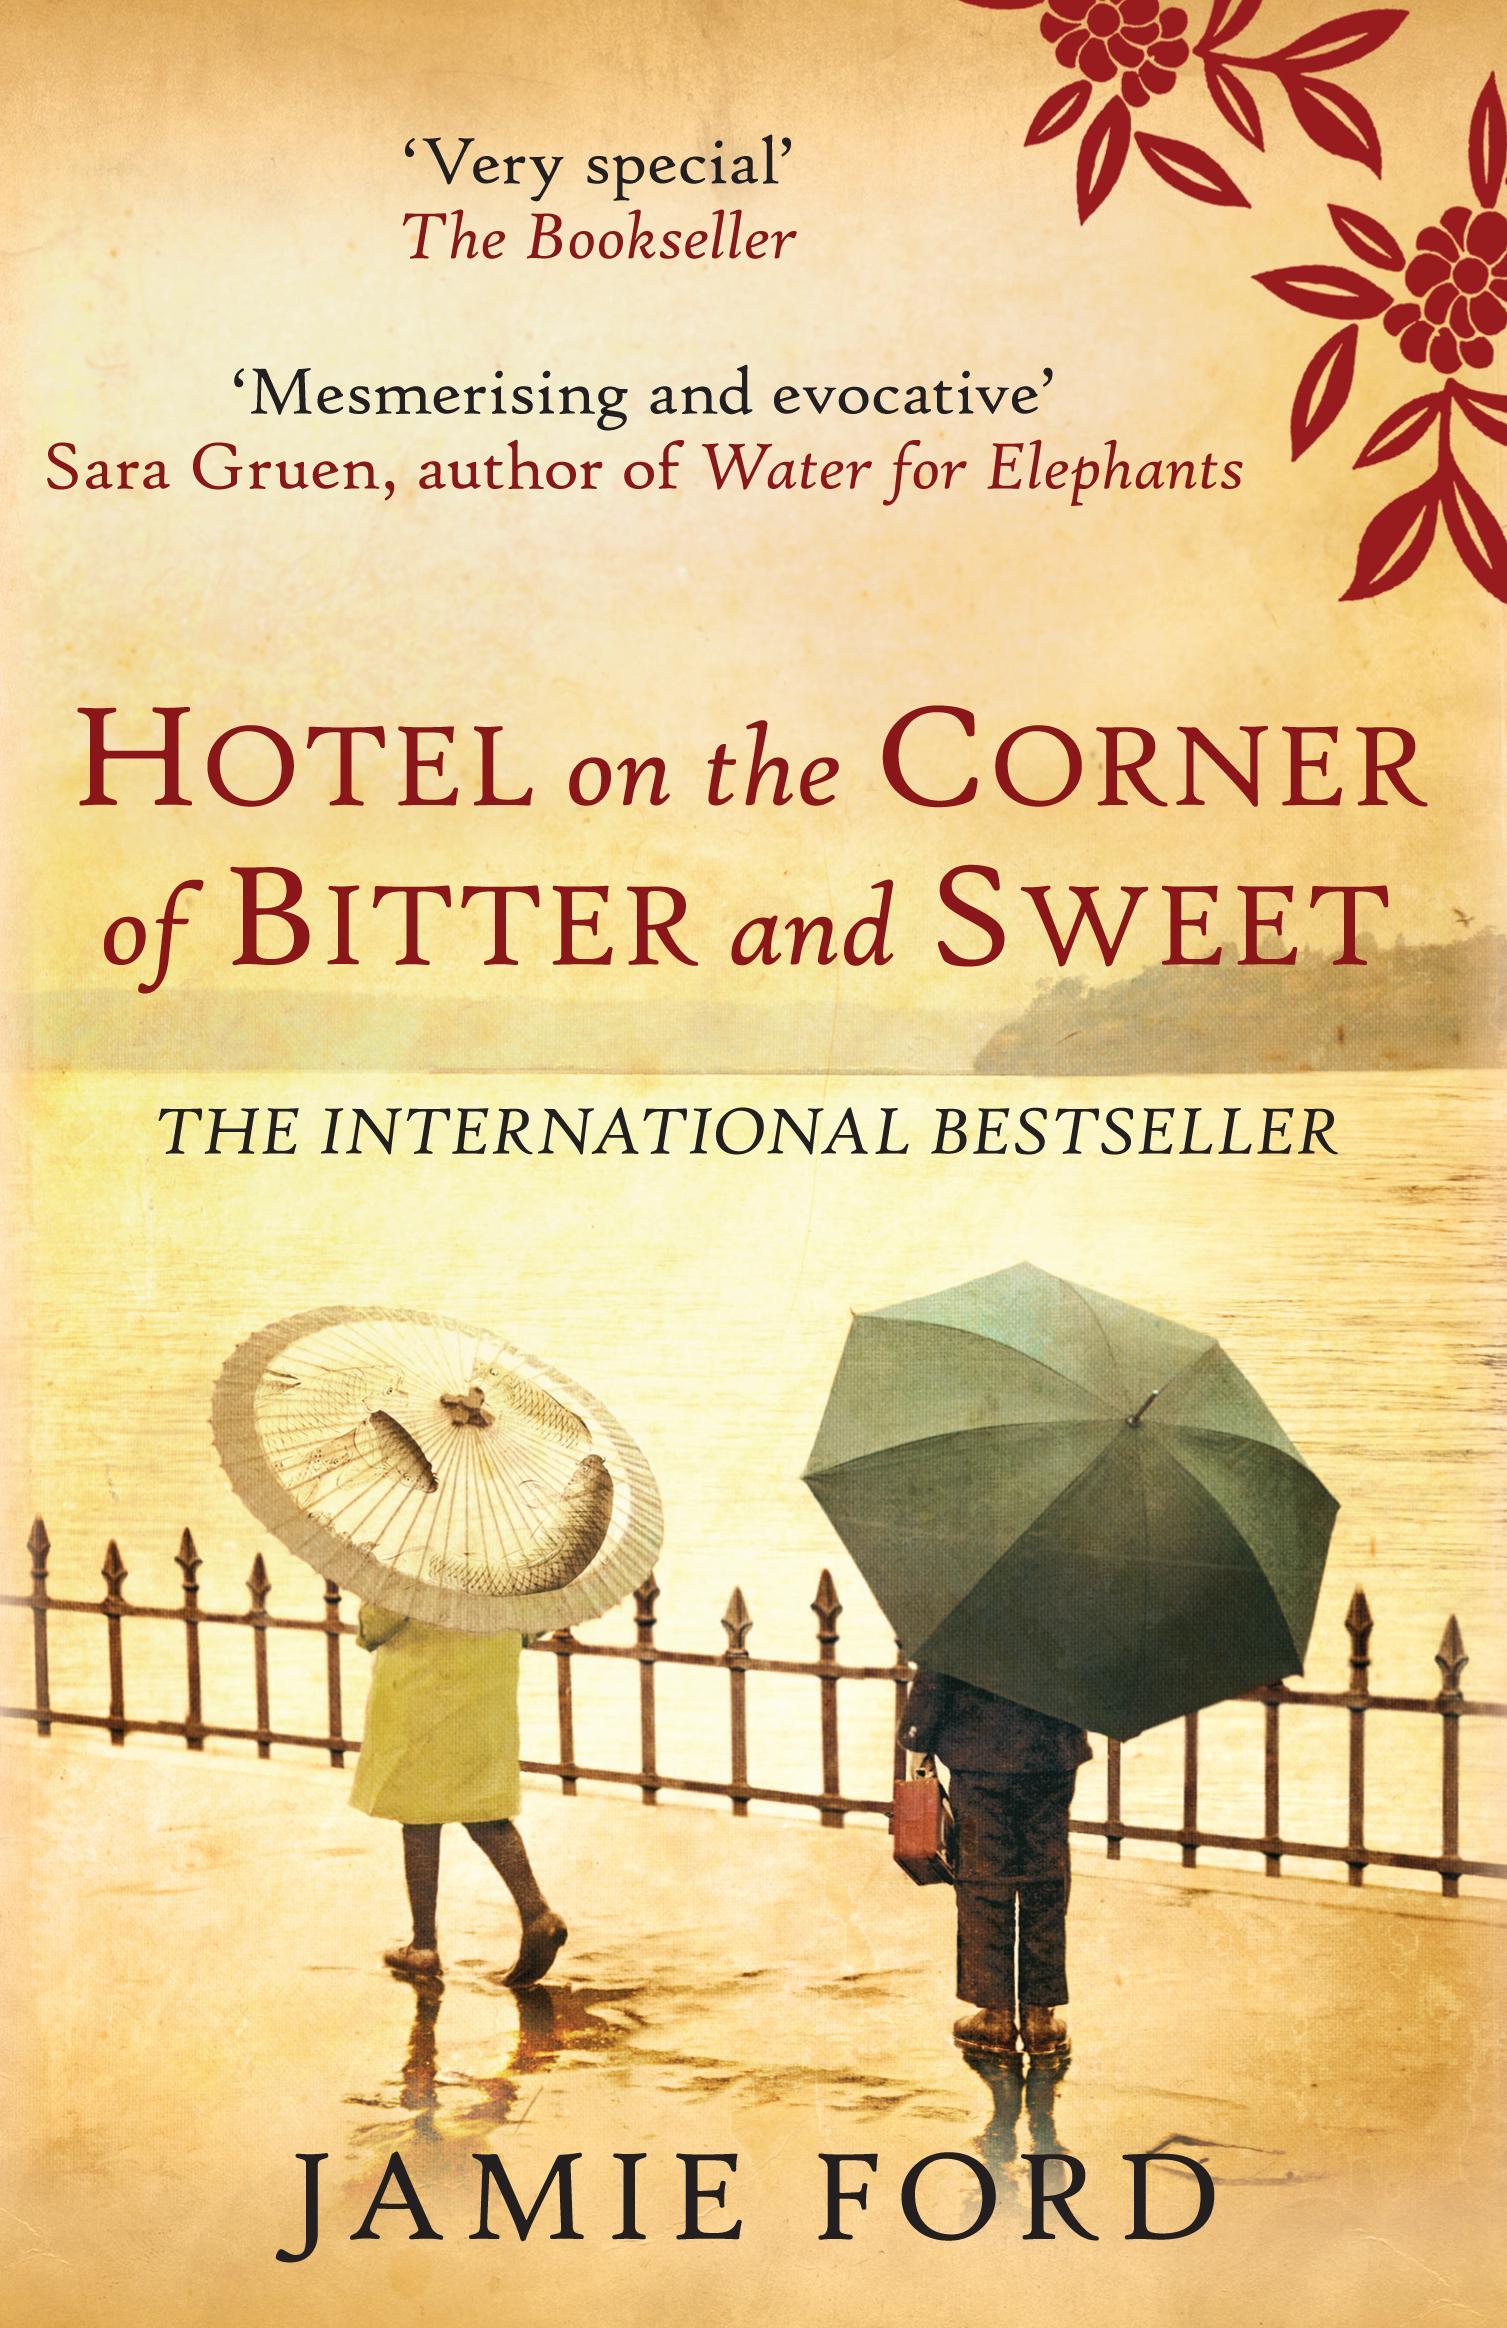 Hotel on the Corner of Bitter and Sweet - Jamie Ford